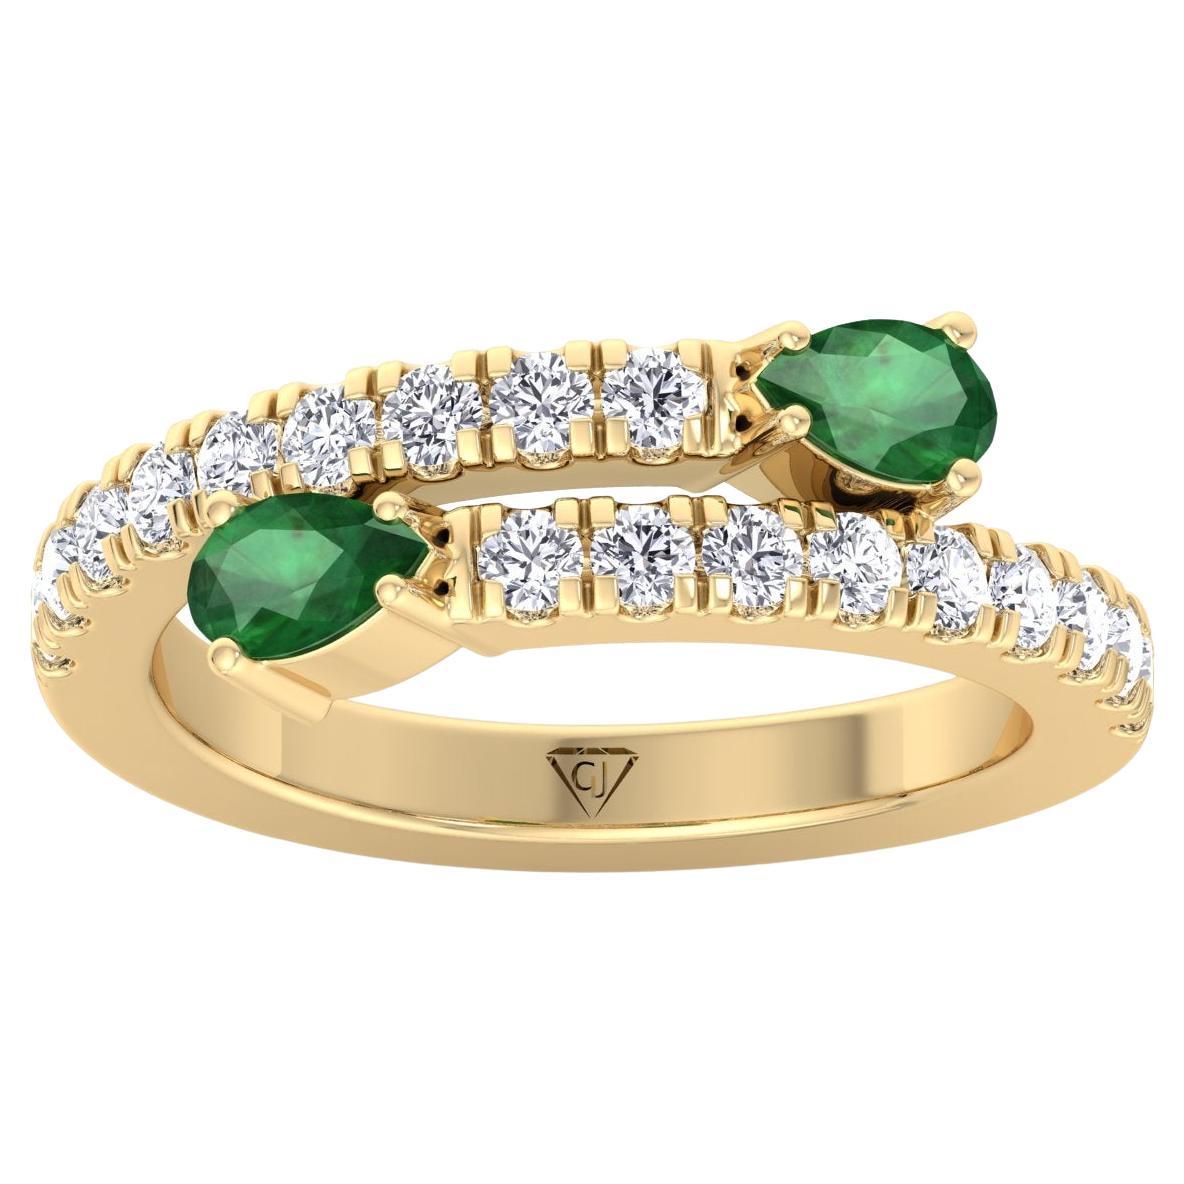 1.25ct Emerald and Diamond Stackable Ring in 18k Yellow Gold by Gem Jewelers Co